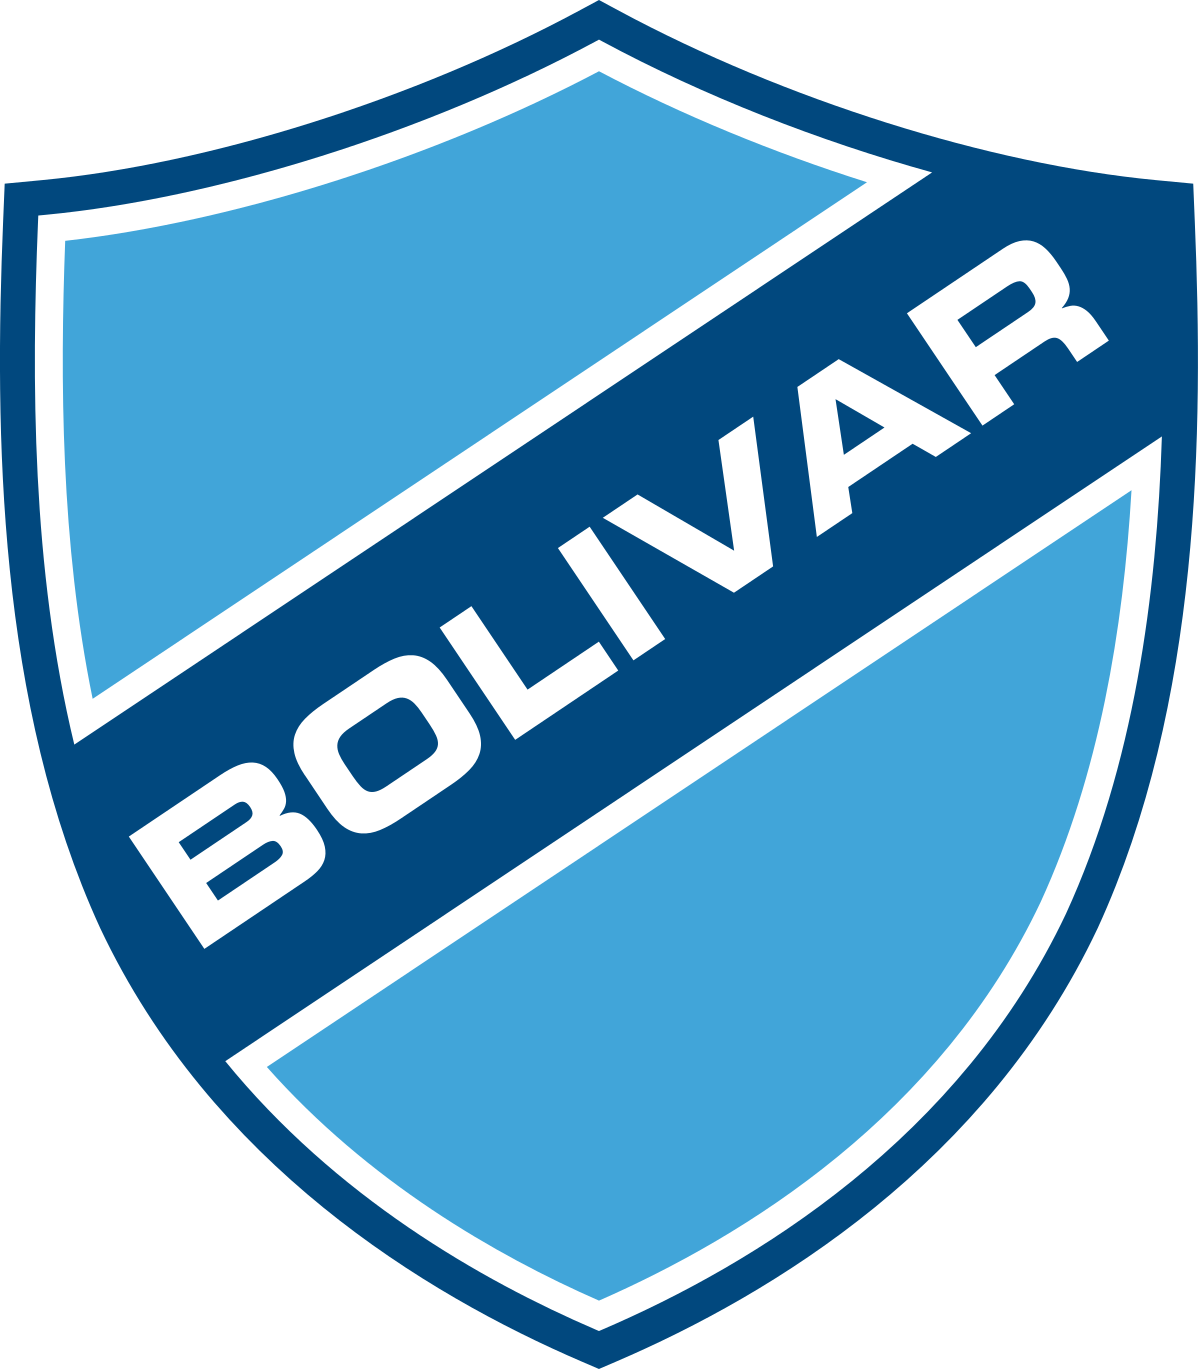 Club Bolivar vs Palmeiras Prediction: Palmeiras Need to Score At Least Two Goals for Winning 